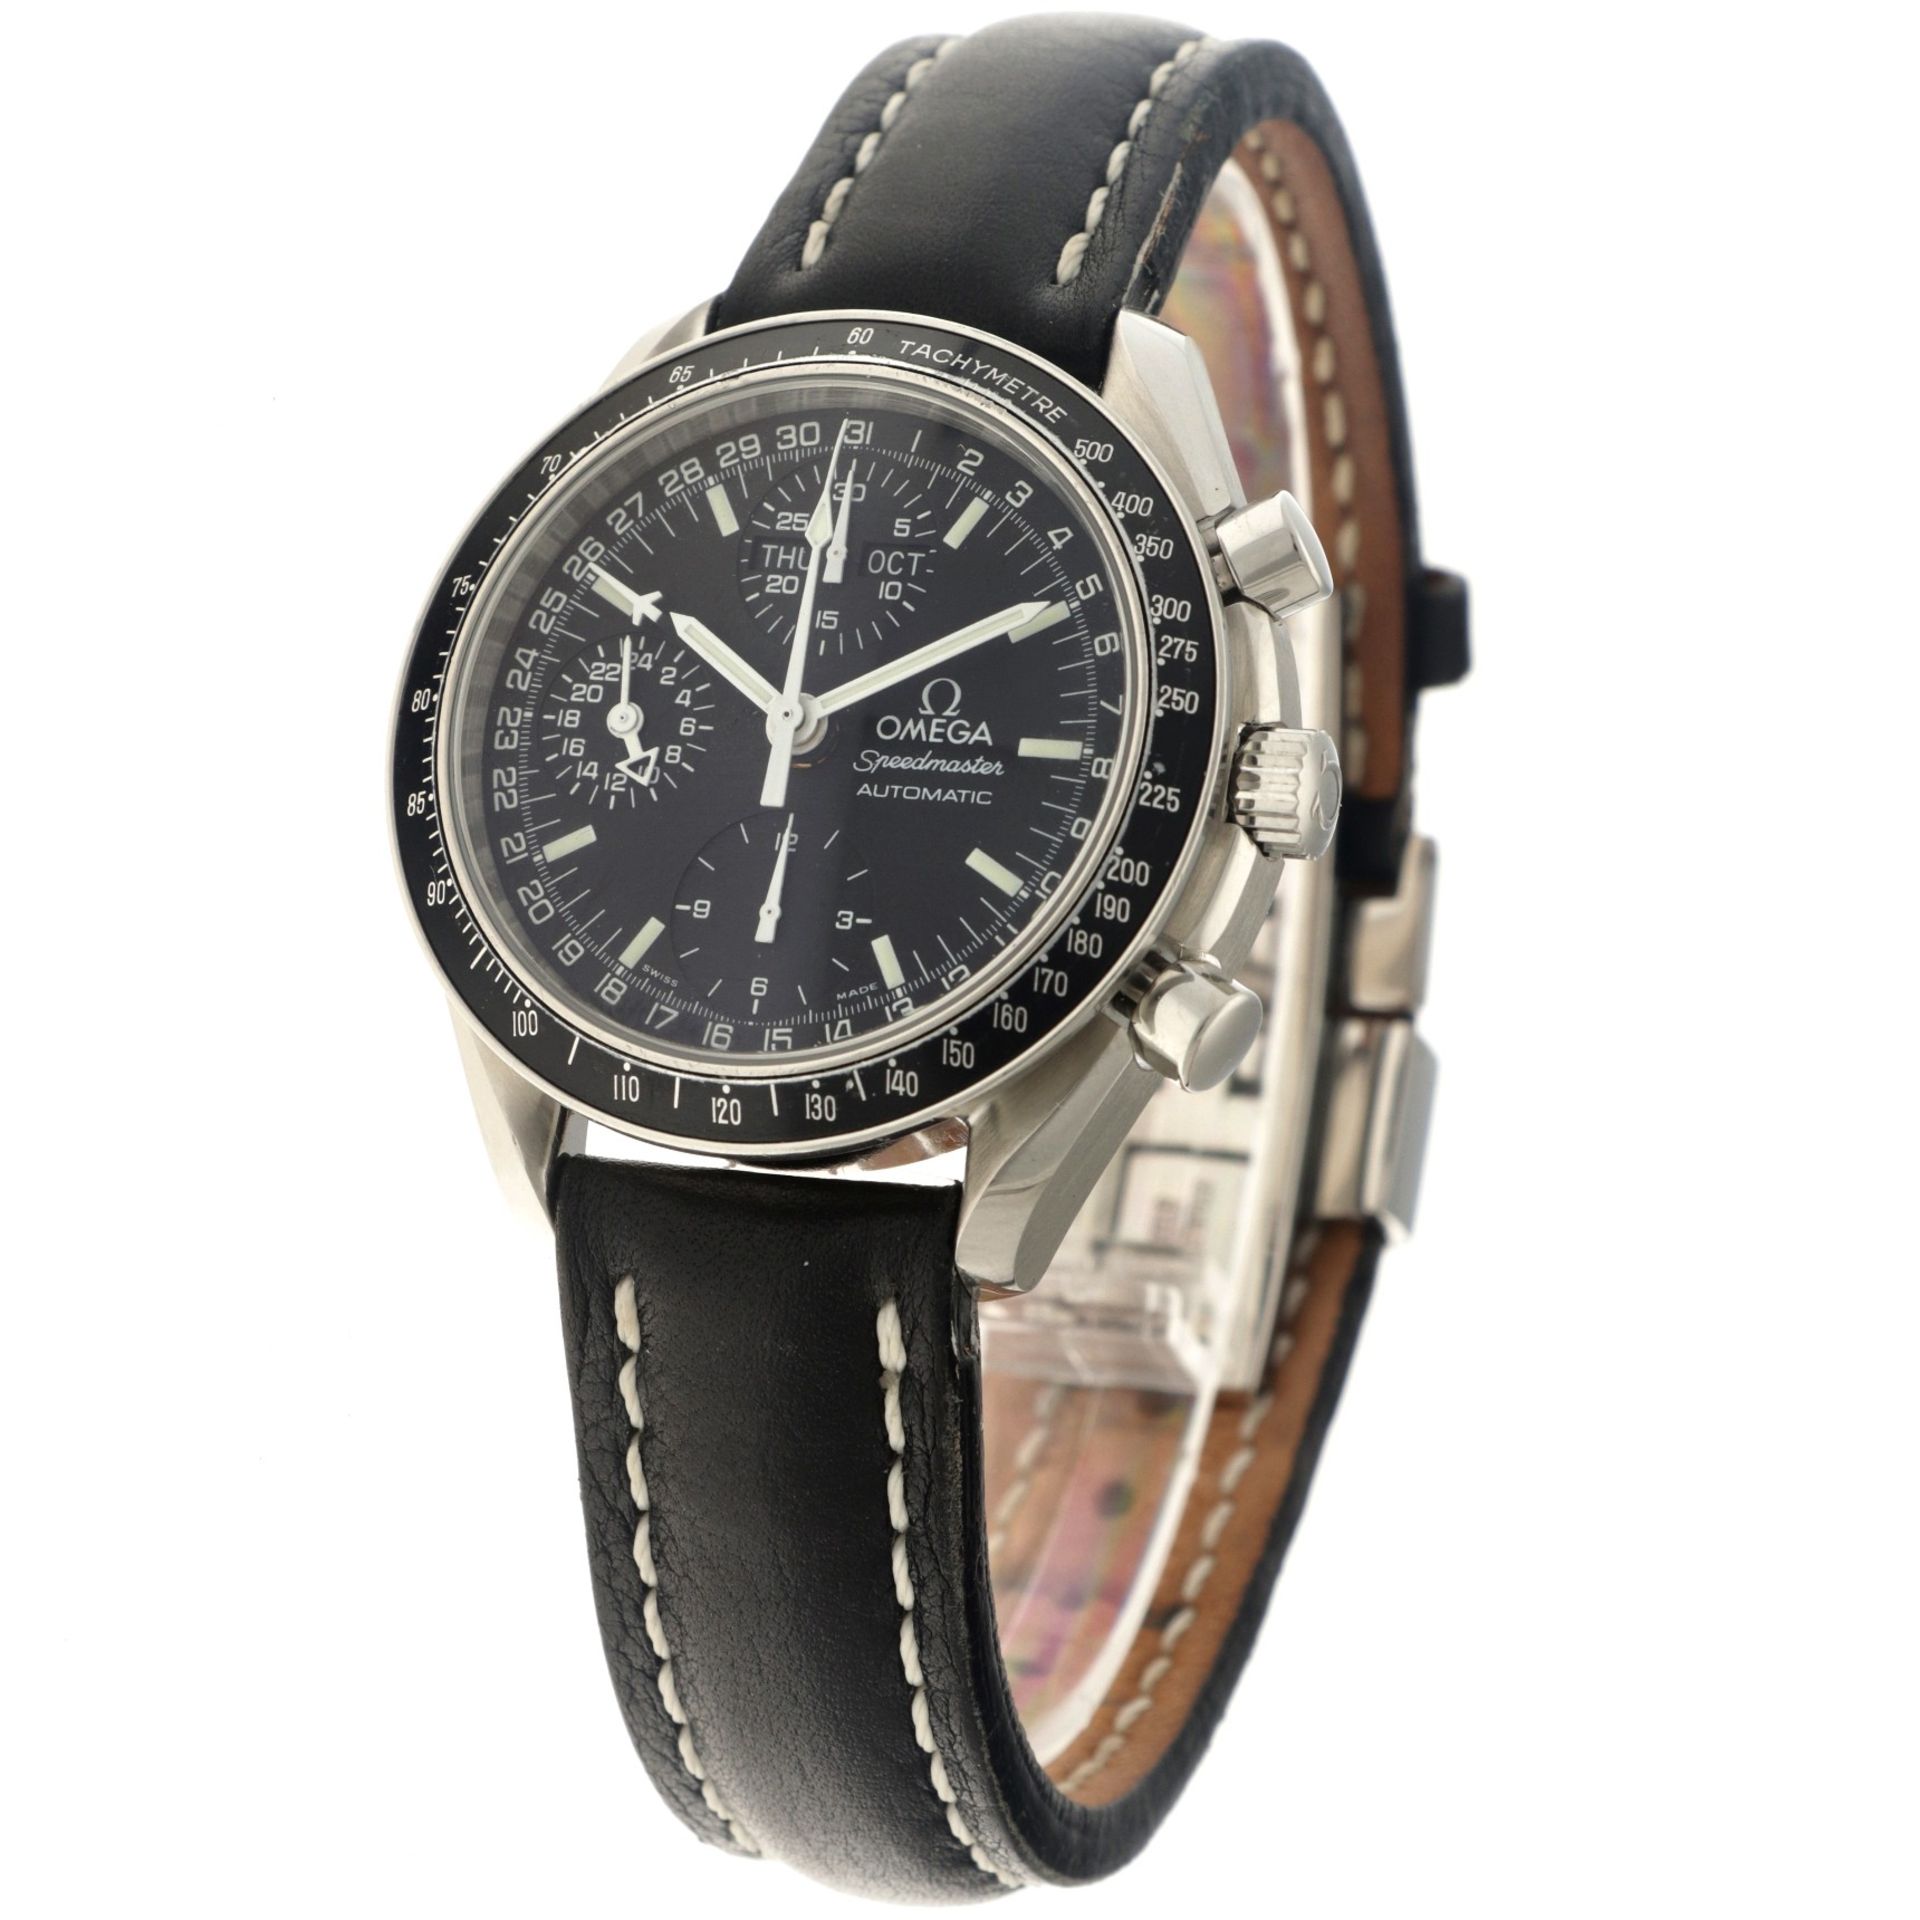 No Reserve - Omega Speedmaster Triple Date 175.0084 - Men's Watch - approx. 1998. - Image 2 of 6